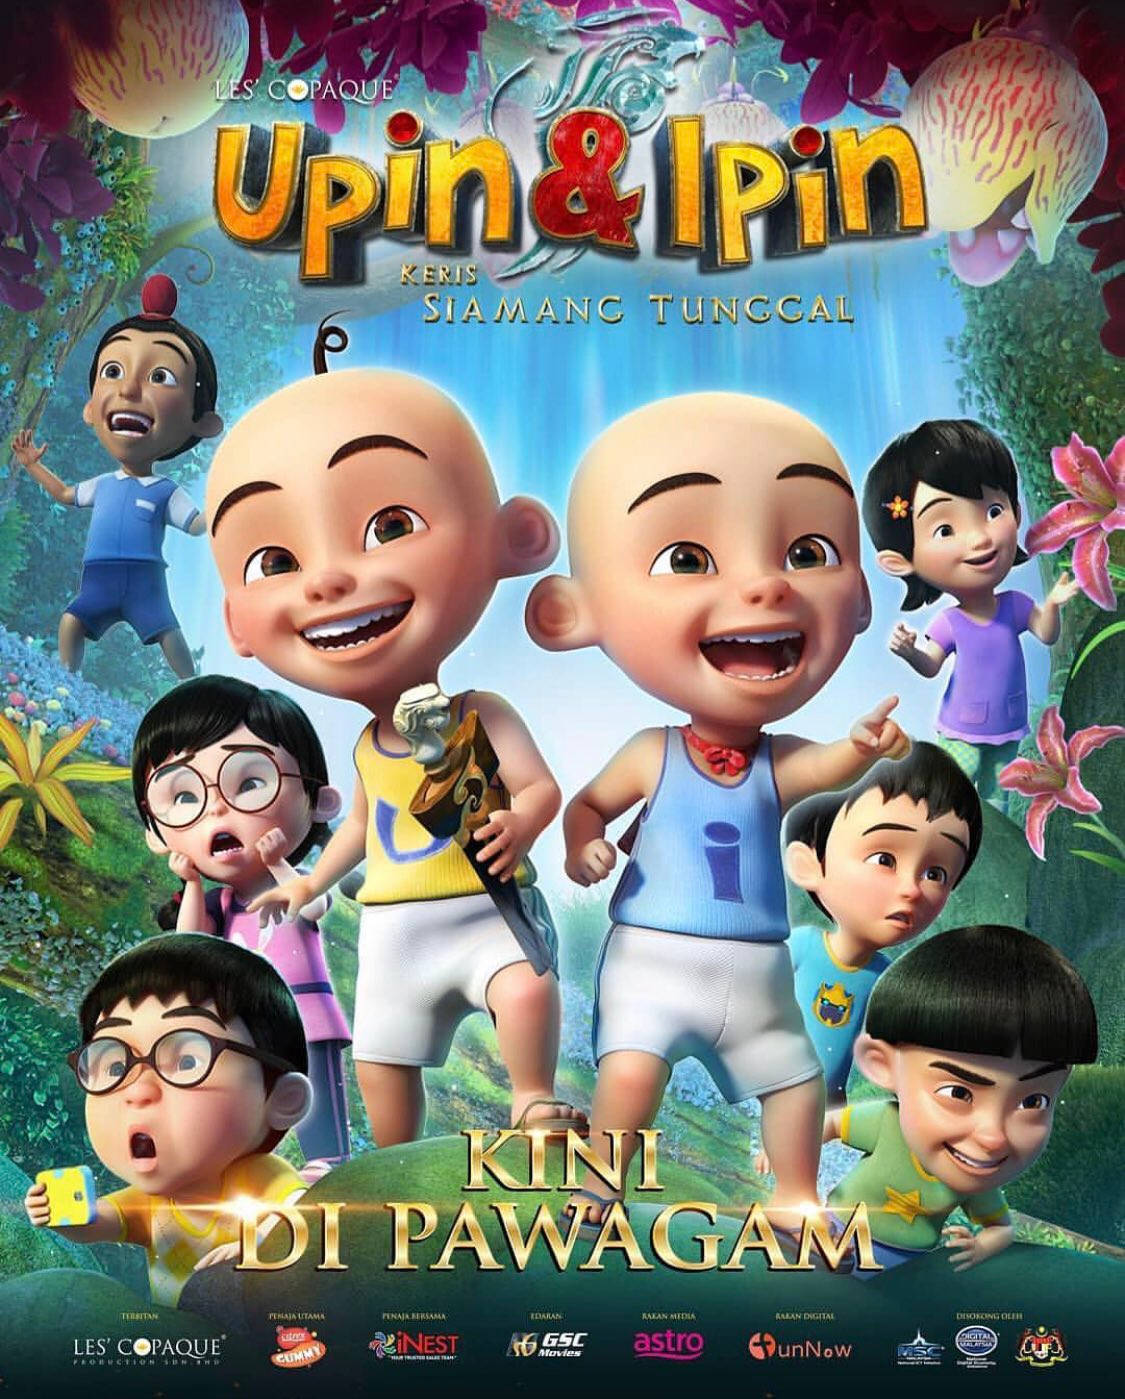 Awesome Upin Ipin Movie Poster Wallpaper